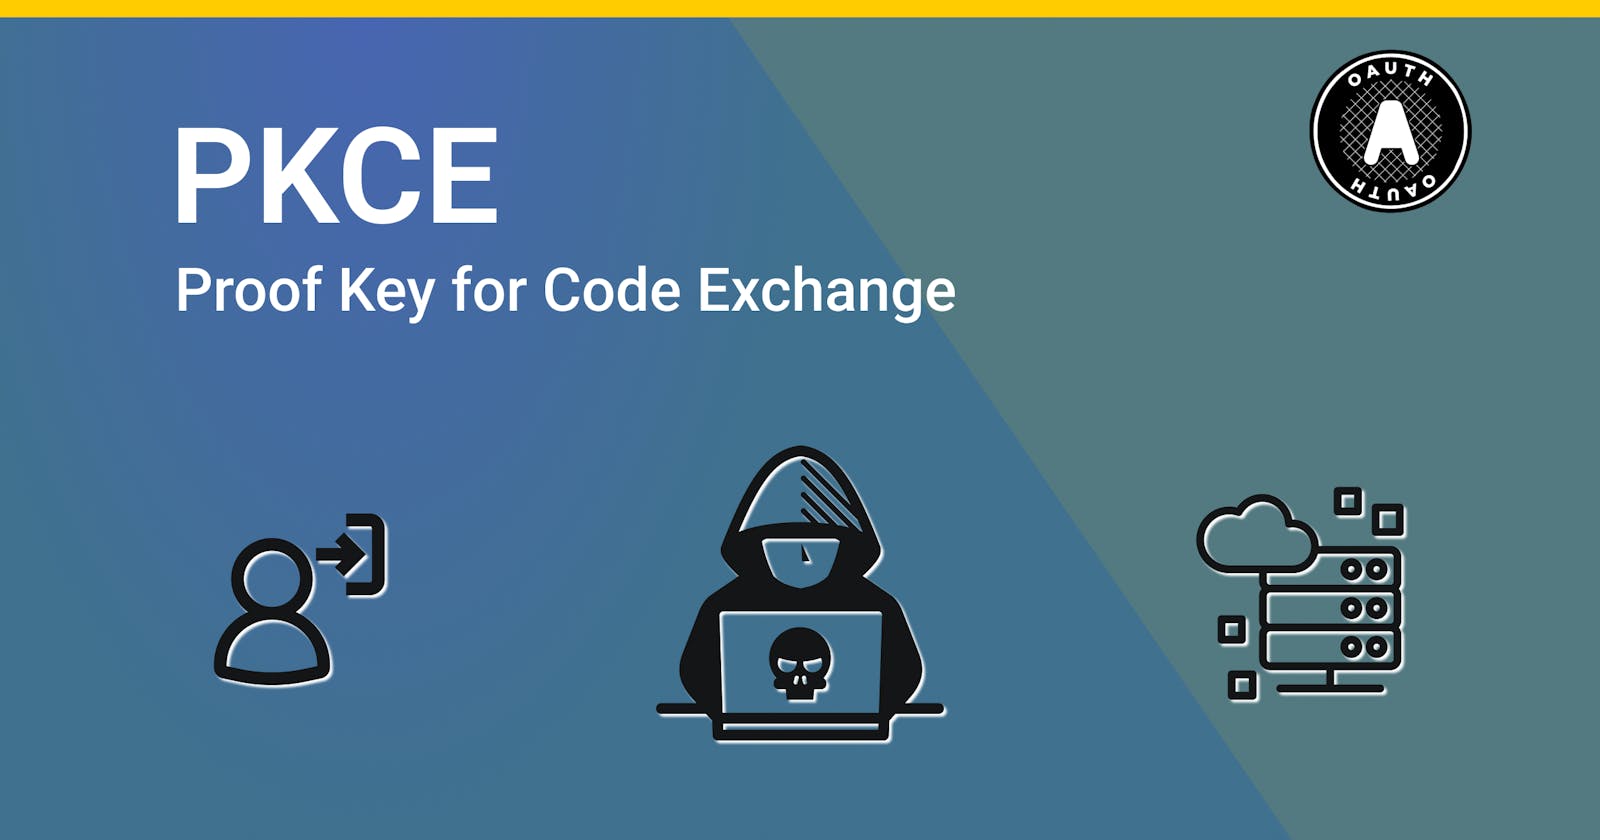 Teach me PKCE (Proof Key for Code Exchange) in 5 minutes